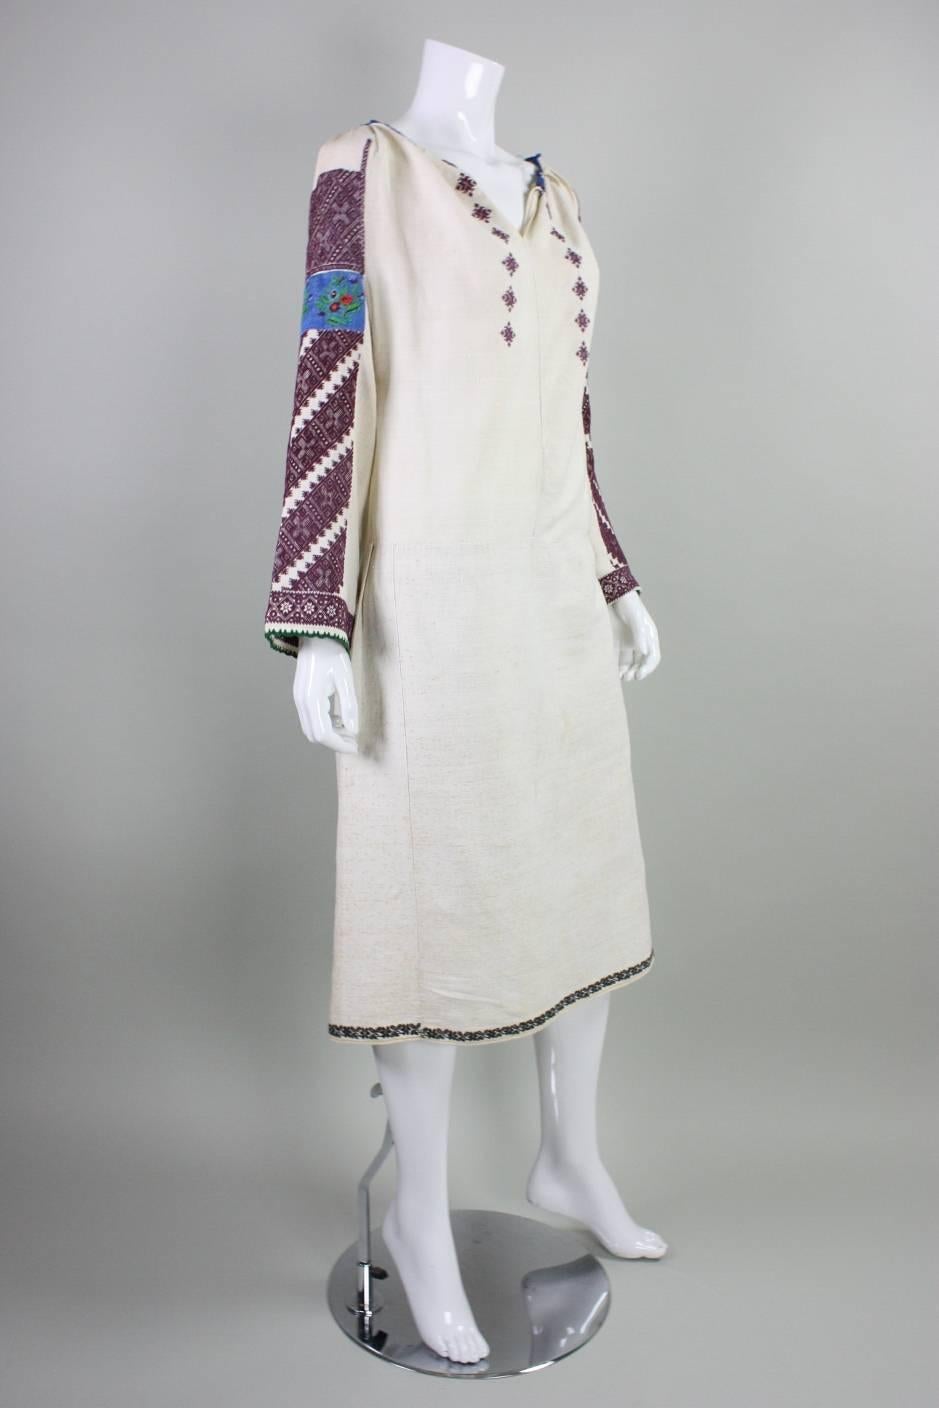 Vintage Eastern European folk dress likely dates to the 1930's or prior. It is made from cream linen with fine hand-embroidery on the sleeves, at hem, and front bust.  Underarm gussets. Unlined.  No closures.

No size label. Please refer to